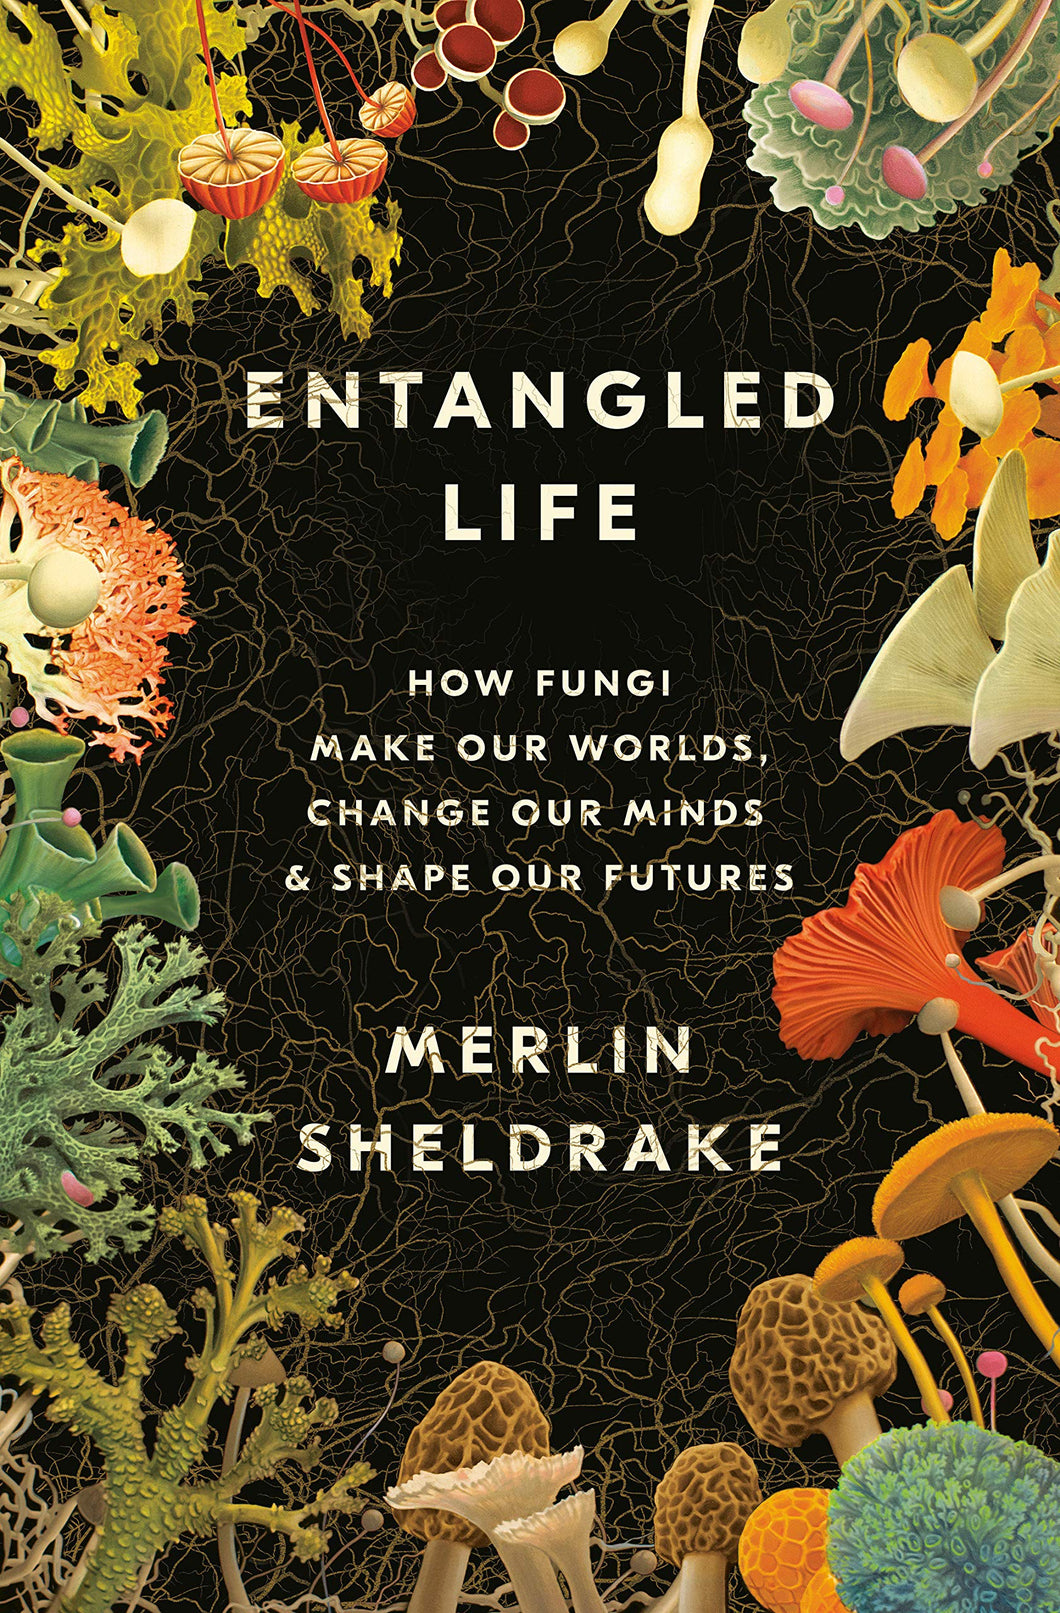 Entangled Life: How Fungi Make Our Worlds, Change Our Minds & Shape Our Futures [Merlin Sheldrake]